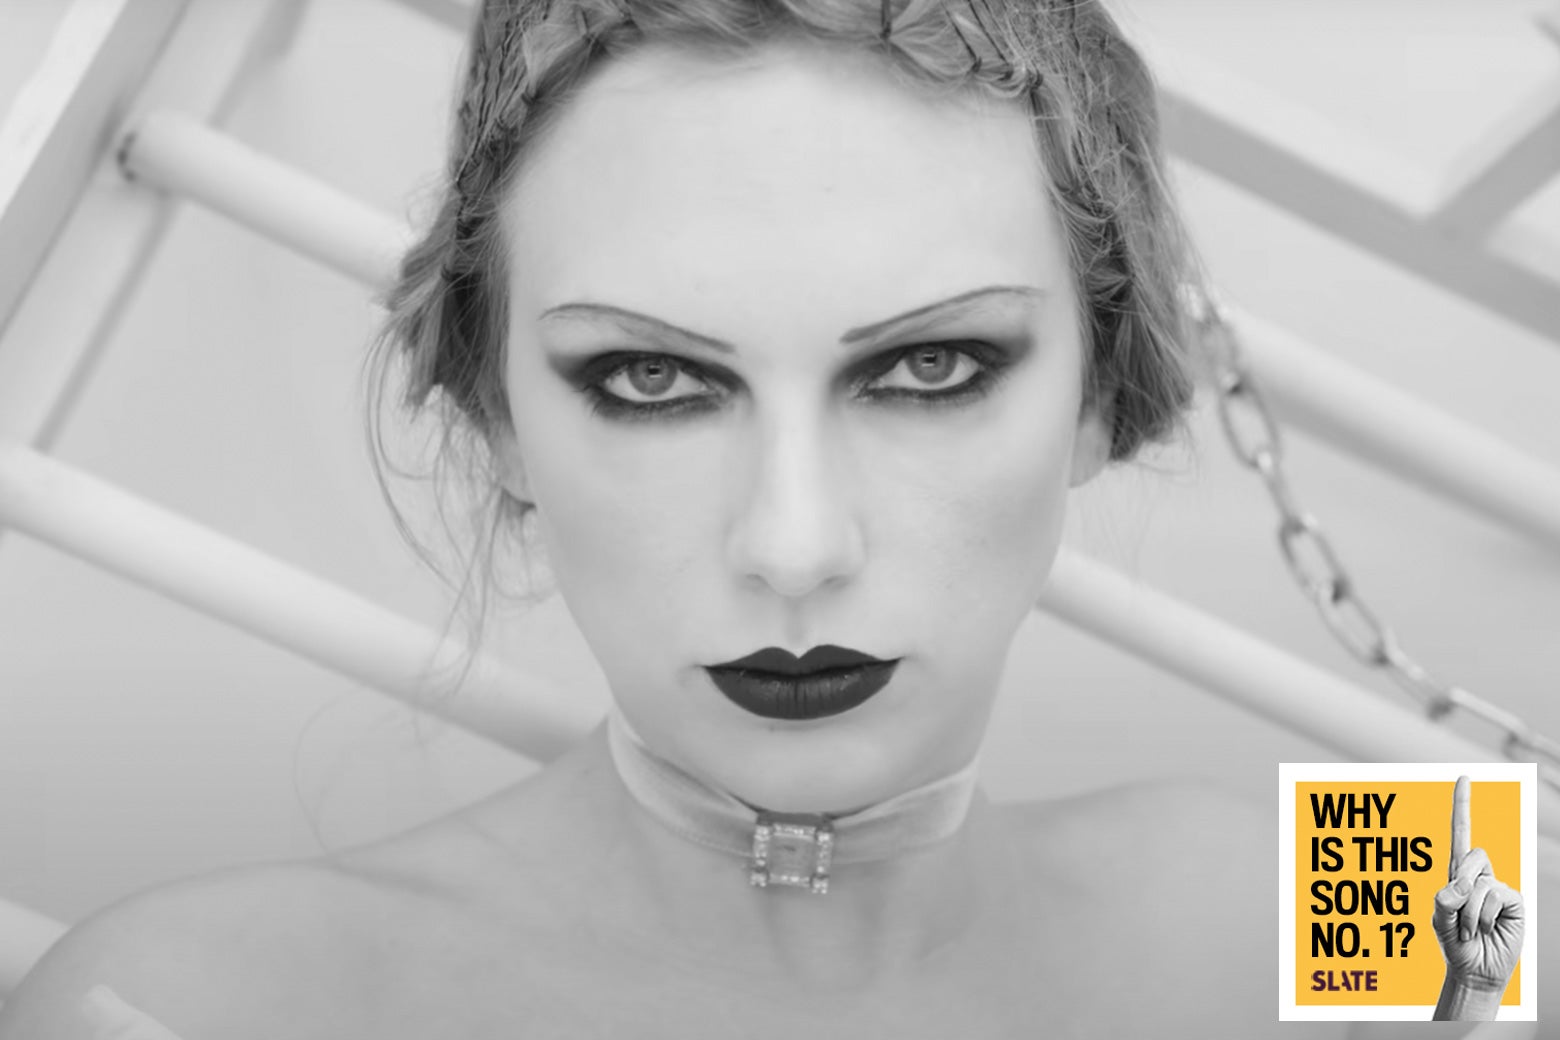 Taylor Swift looks directly at the camera and is wearing lots of black eyeshadow and black lipstick in a black-and-white photo. In the bottom, a bright yellow logo reads "Why Is This Song No. 1?" and is branded Slate